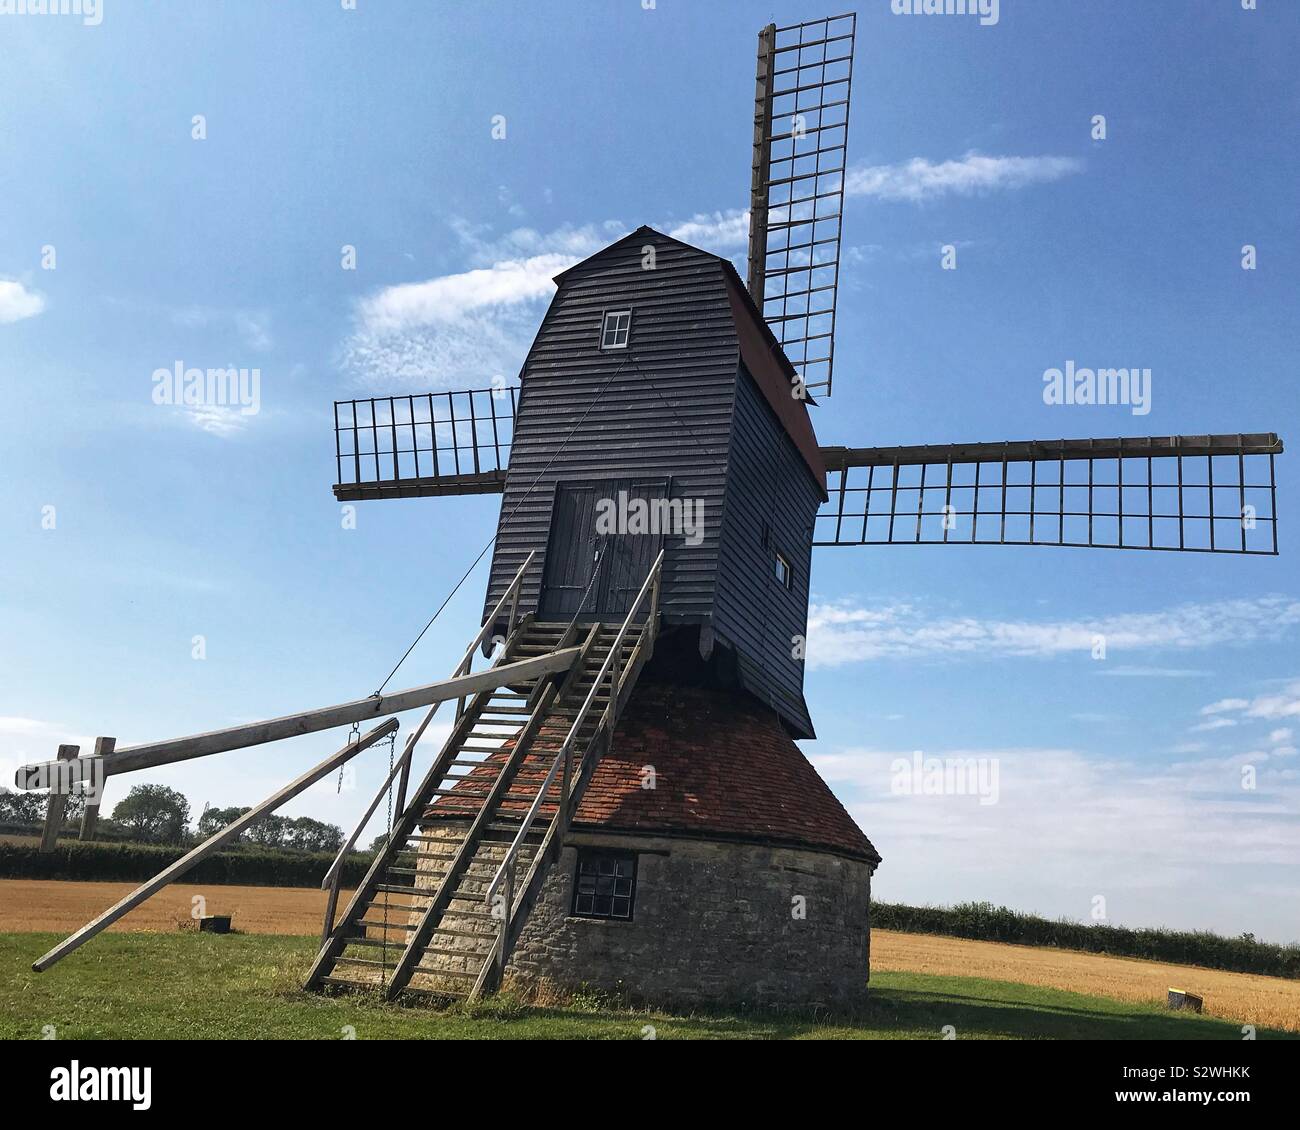 Stevington Windmill In Bedfordshire UK on A Summers Day Stock Photo